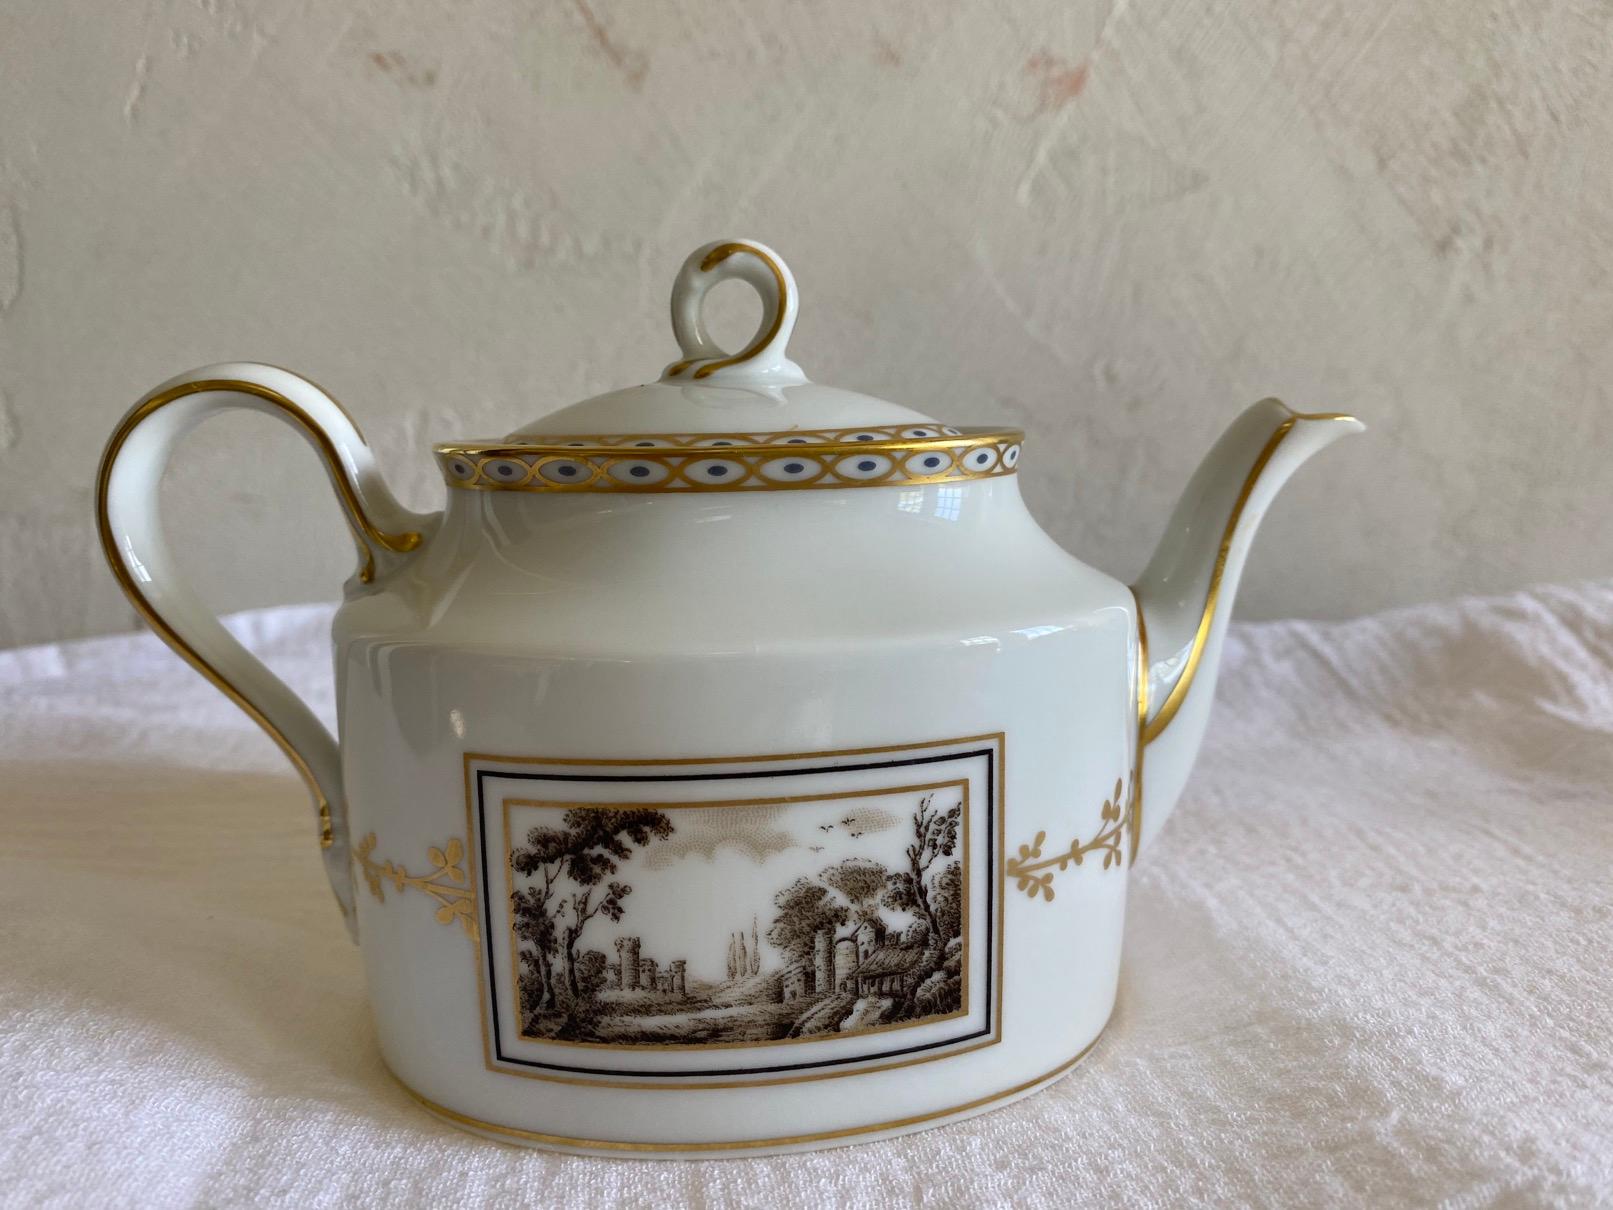 This teapot has the grace and elegance of Regency Period styling. Treat yourself to a cup of tea from this lovely small individual size teapot.